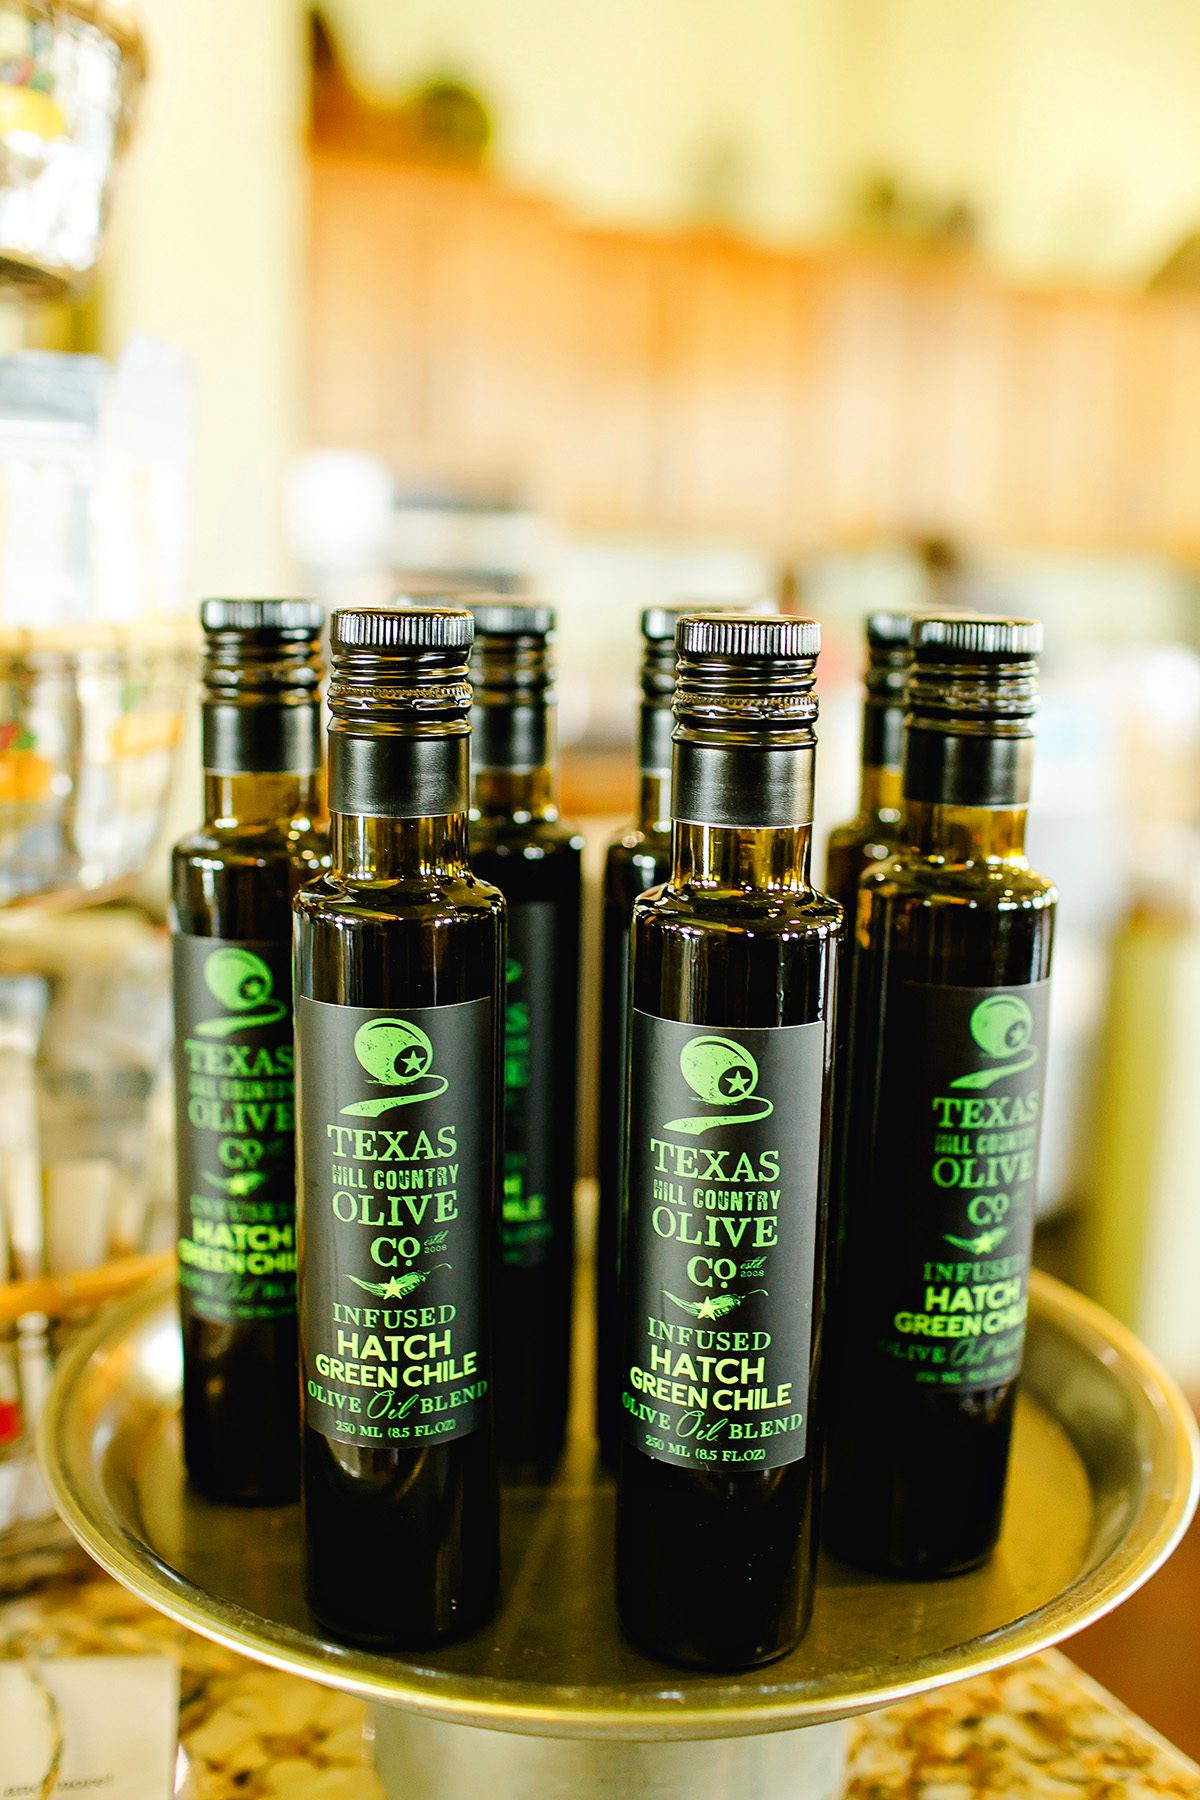 Texas Hill Country Olive Company, Texas Hill Country Olive Oil, Lauren Loves Dripping Springs